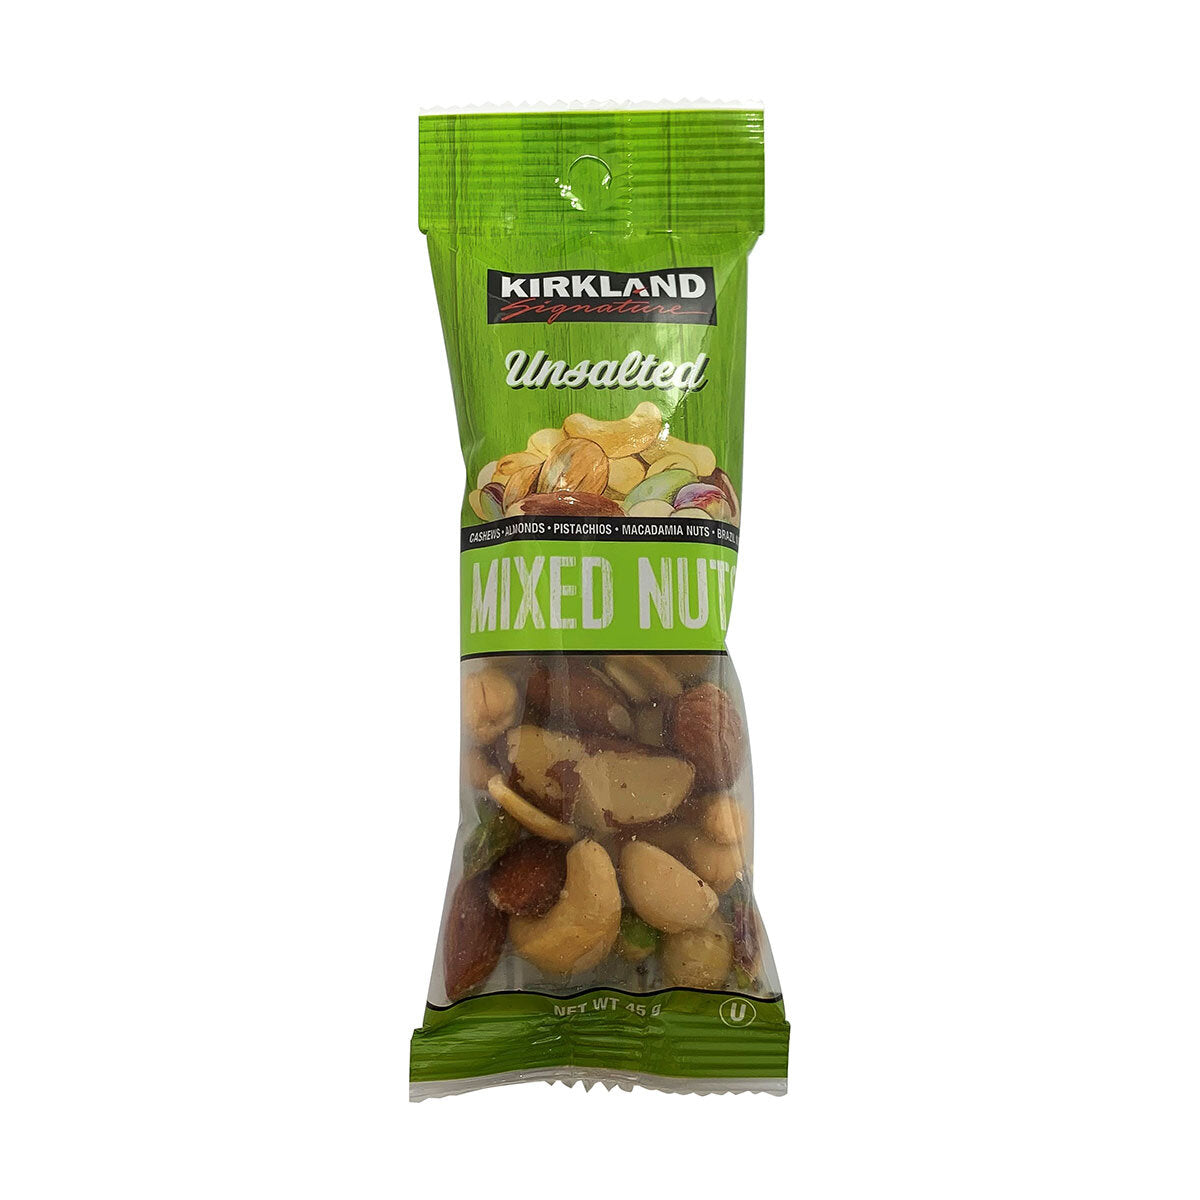 Kirkland Unsalted Mixed Nuts Snack Pack - 45g